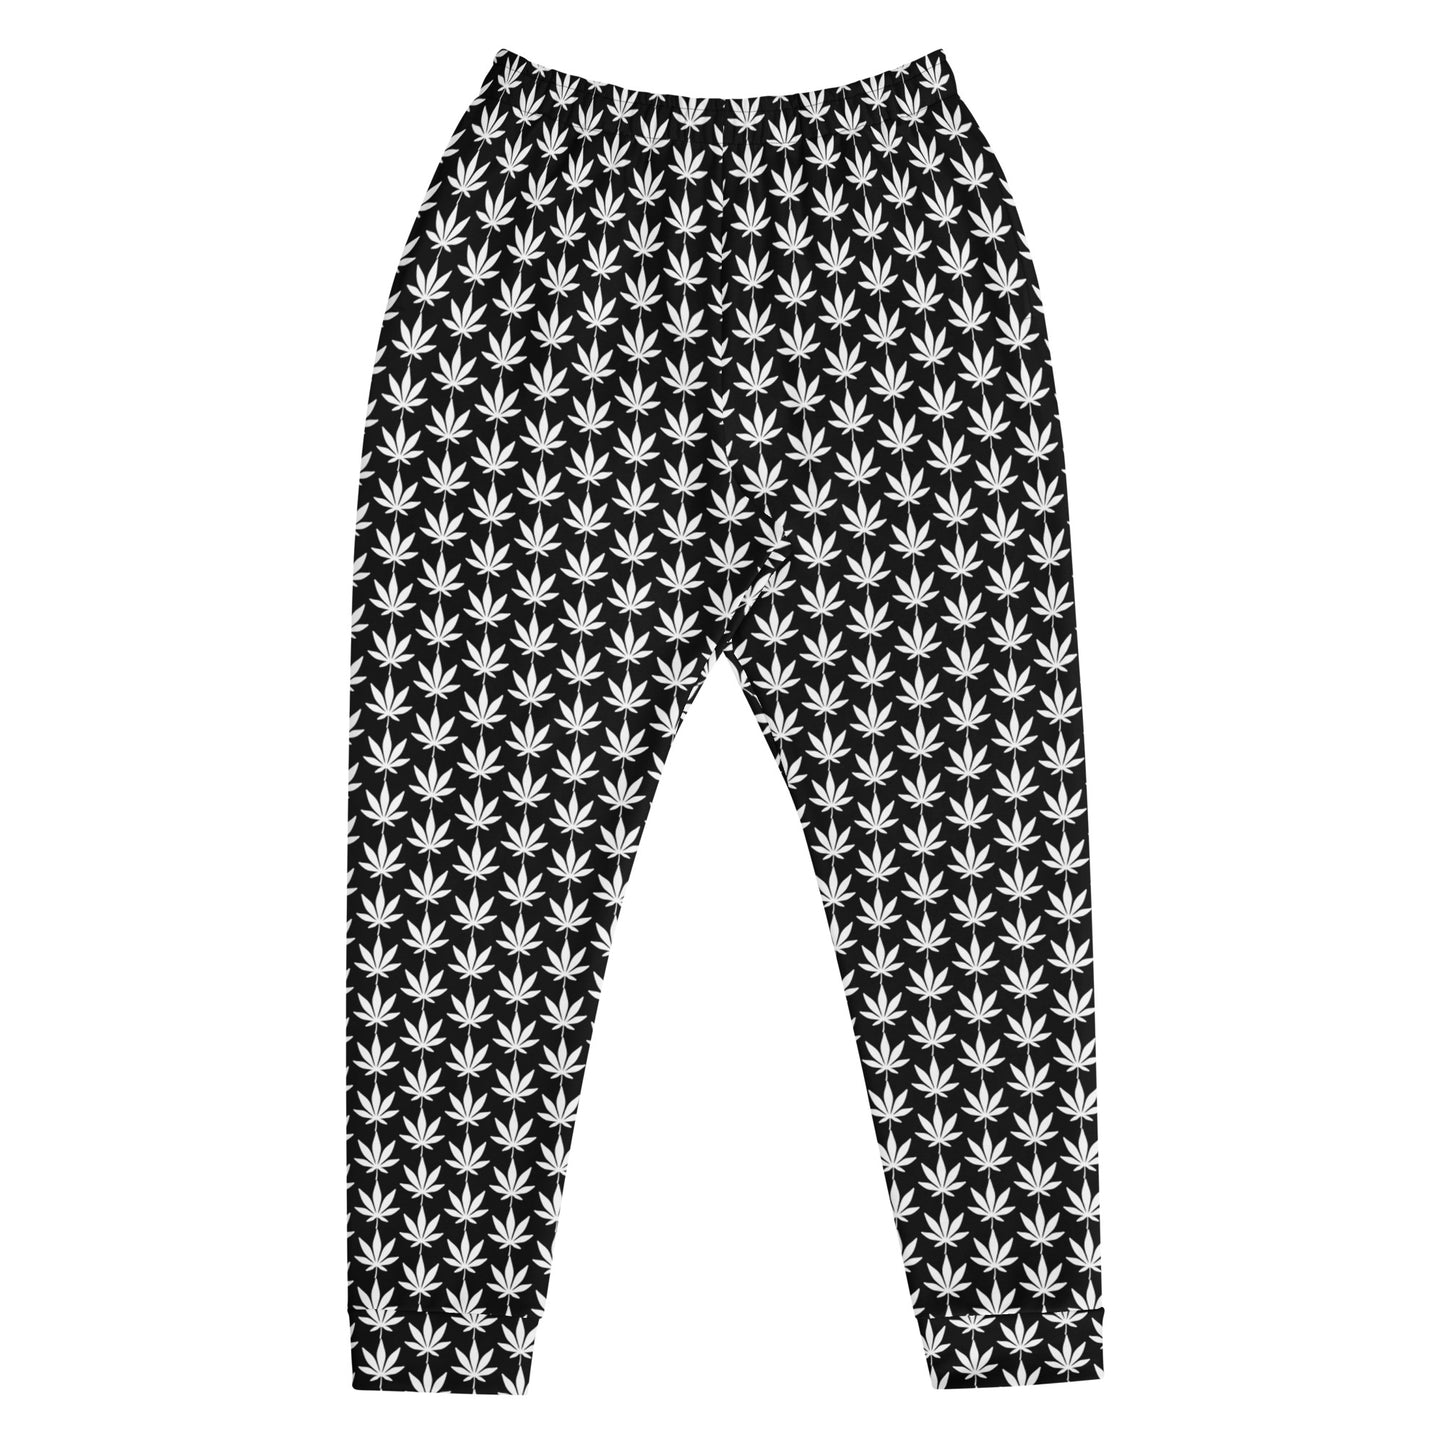 White And Black Men's Joggers